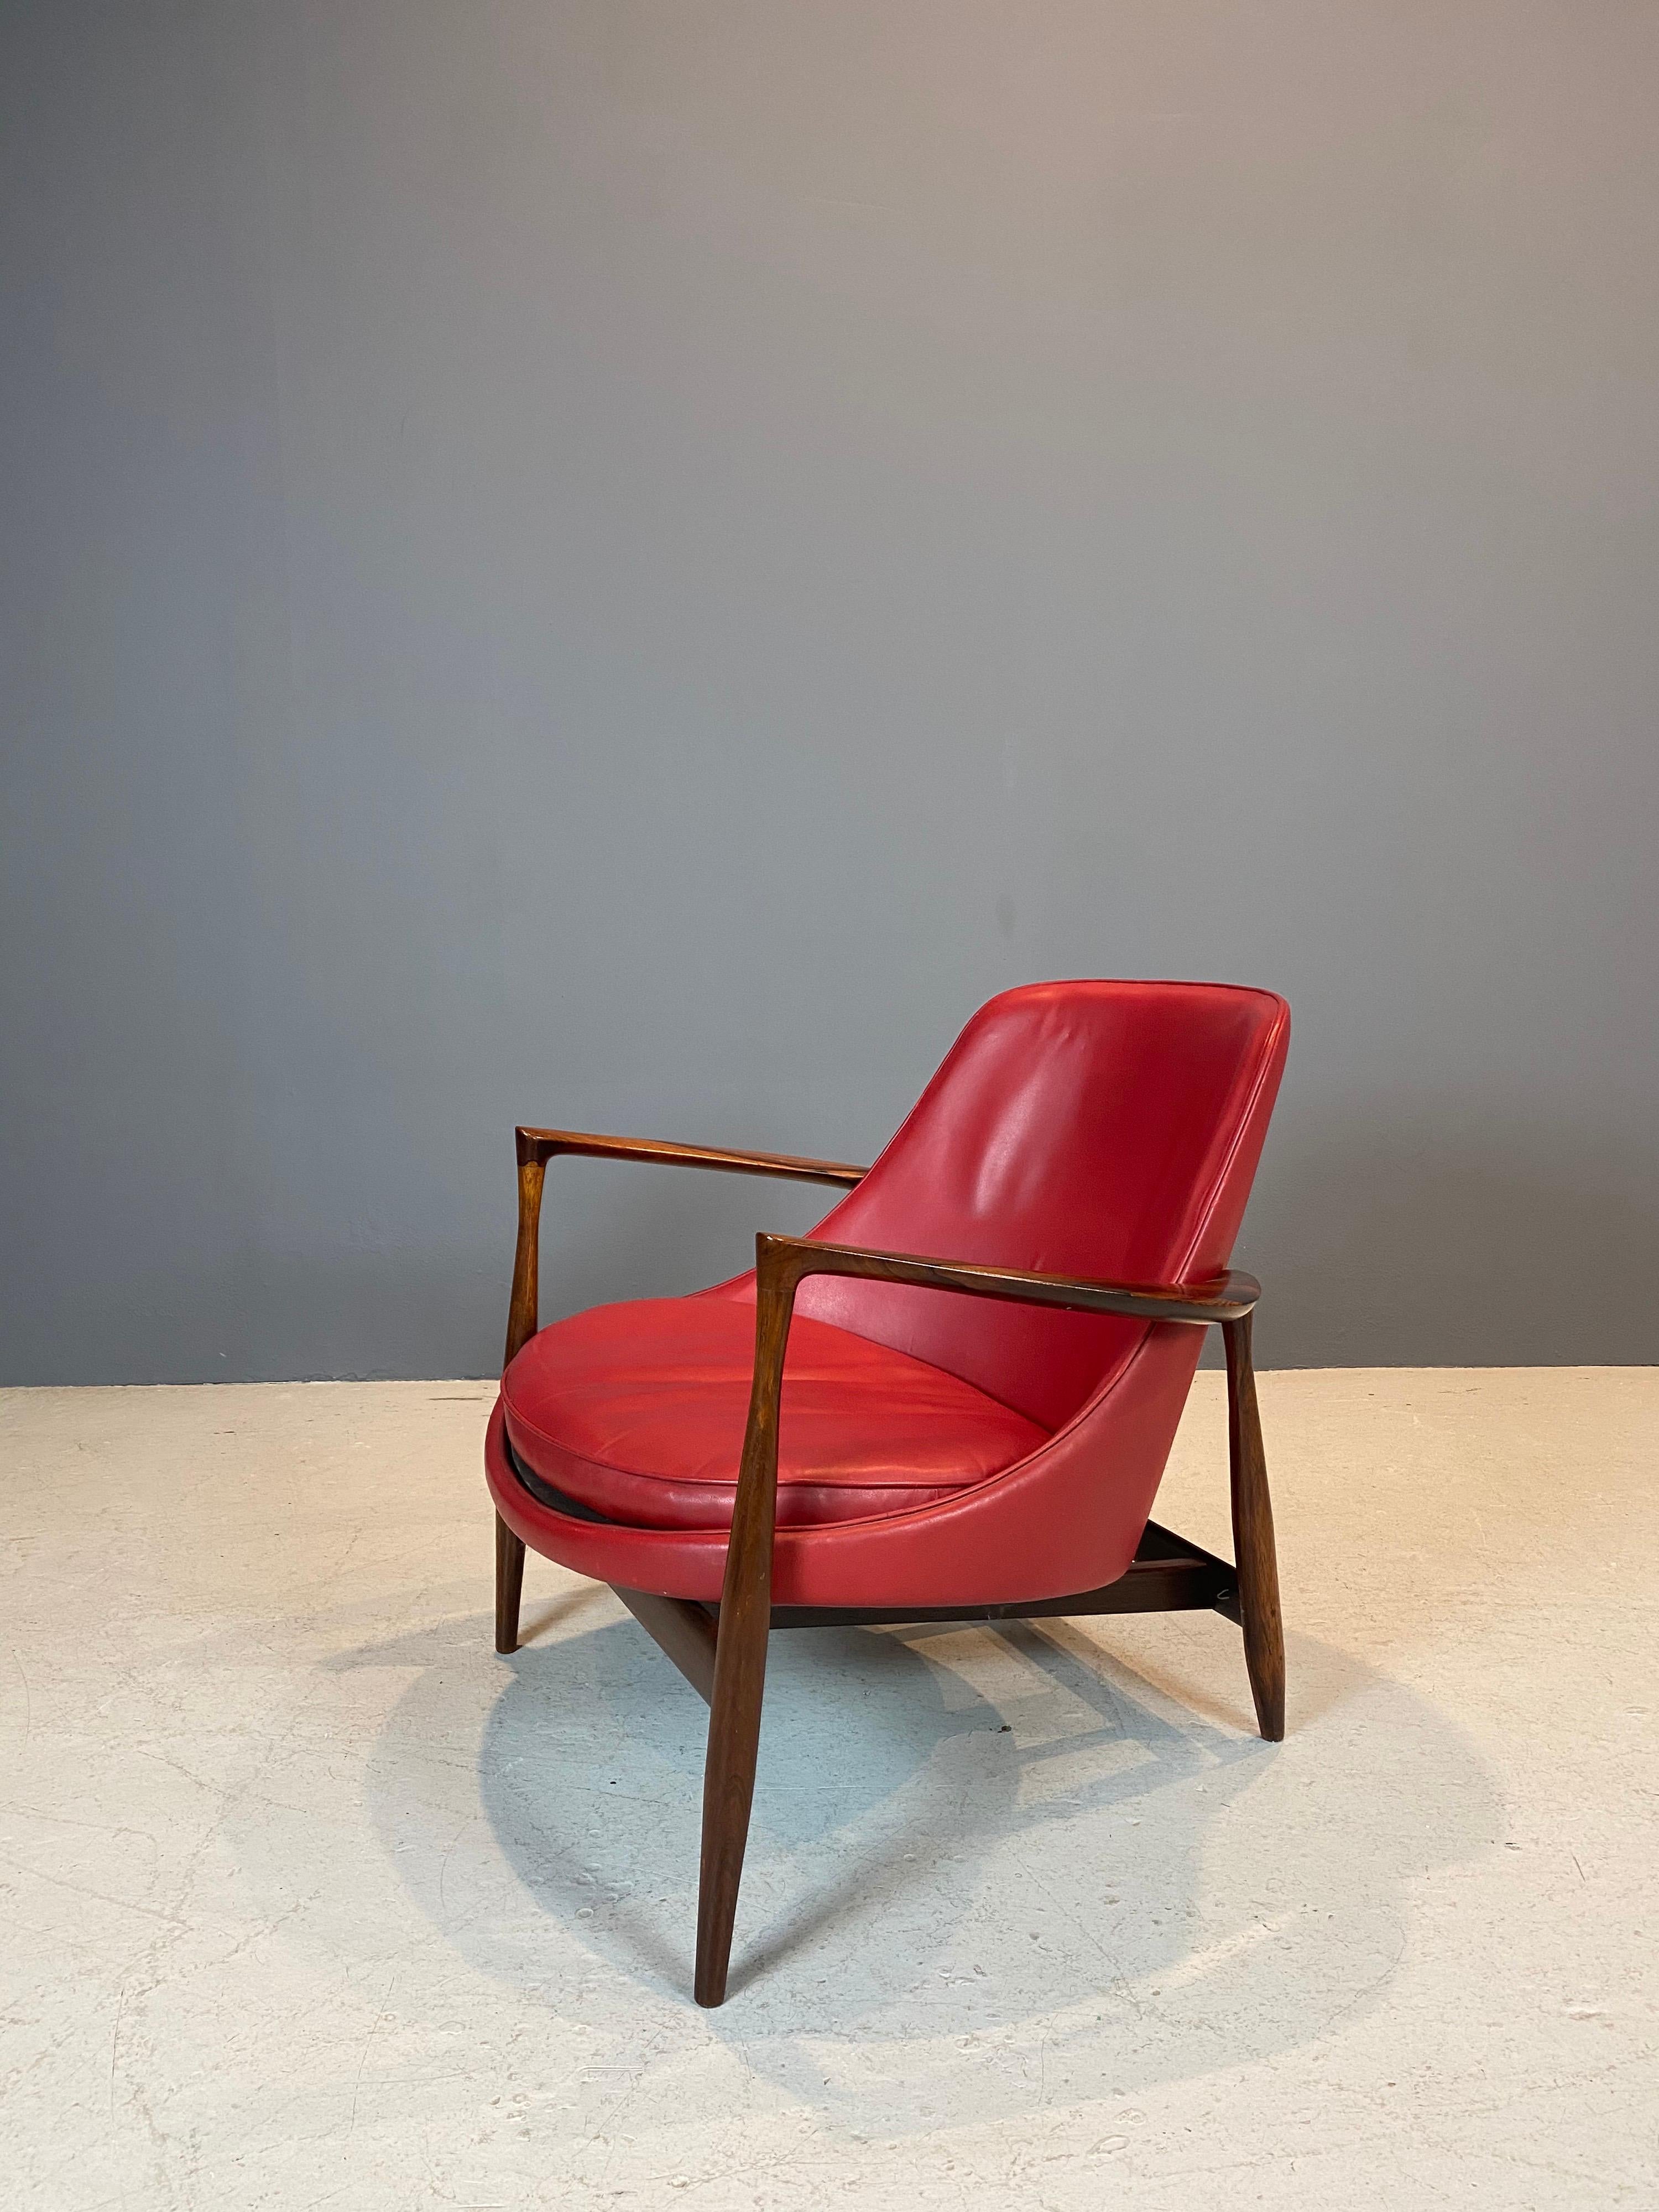 Iconic lounge chair, designed by Ib Kofod - Larsen in 1956 and produced by Christensen and Larsen, Denmark. This example is in rosewood and original red leather.
It is available to view in my gallery in Chelsea, NY.